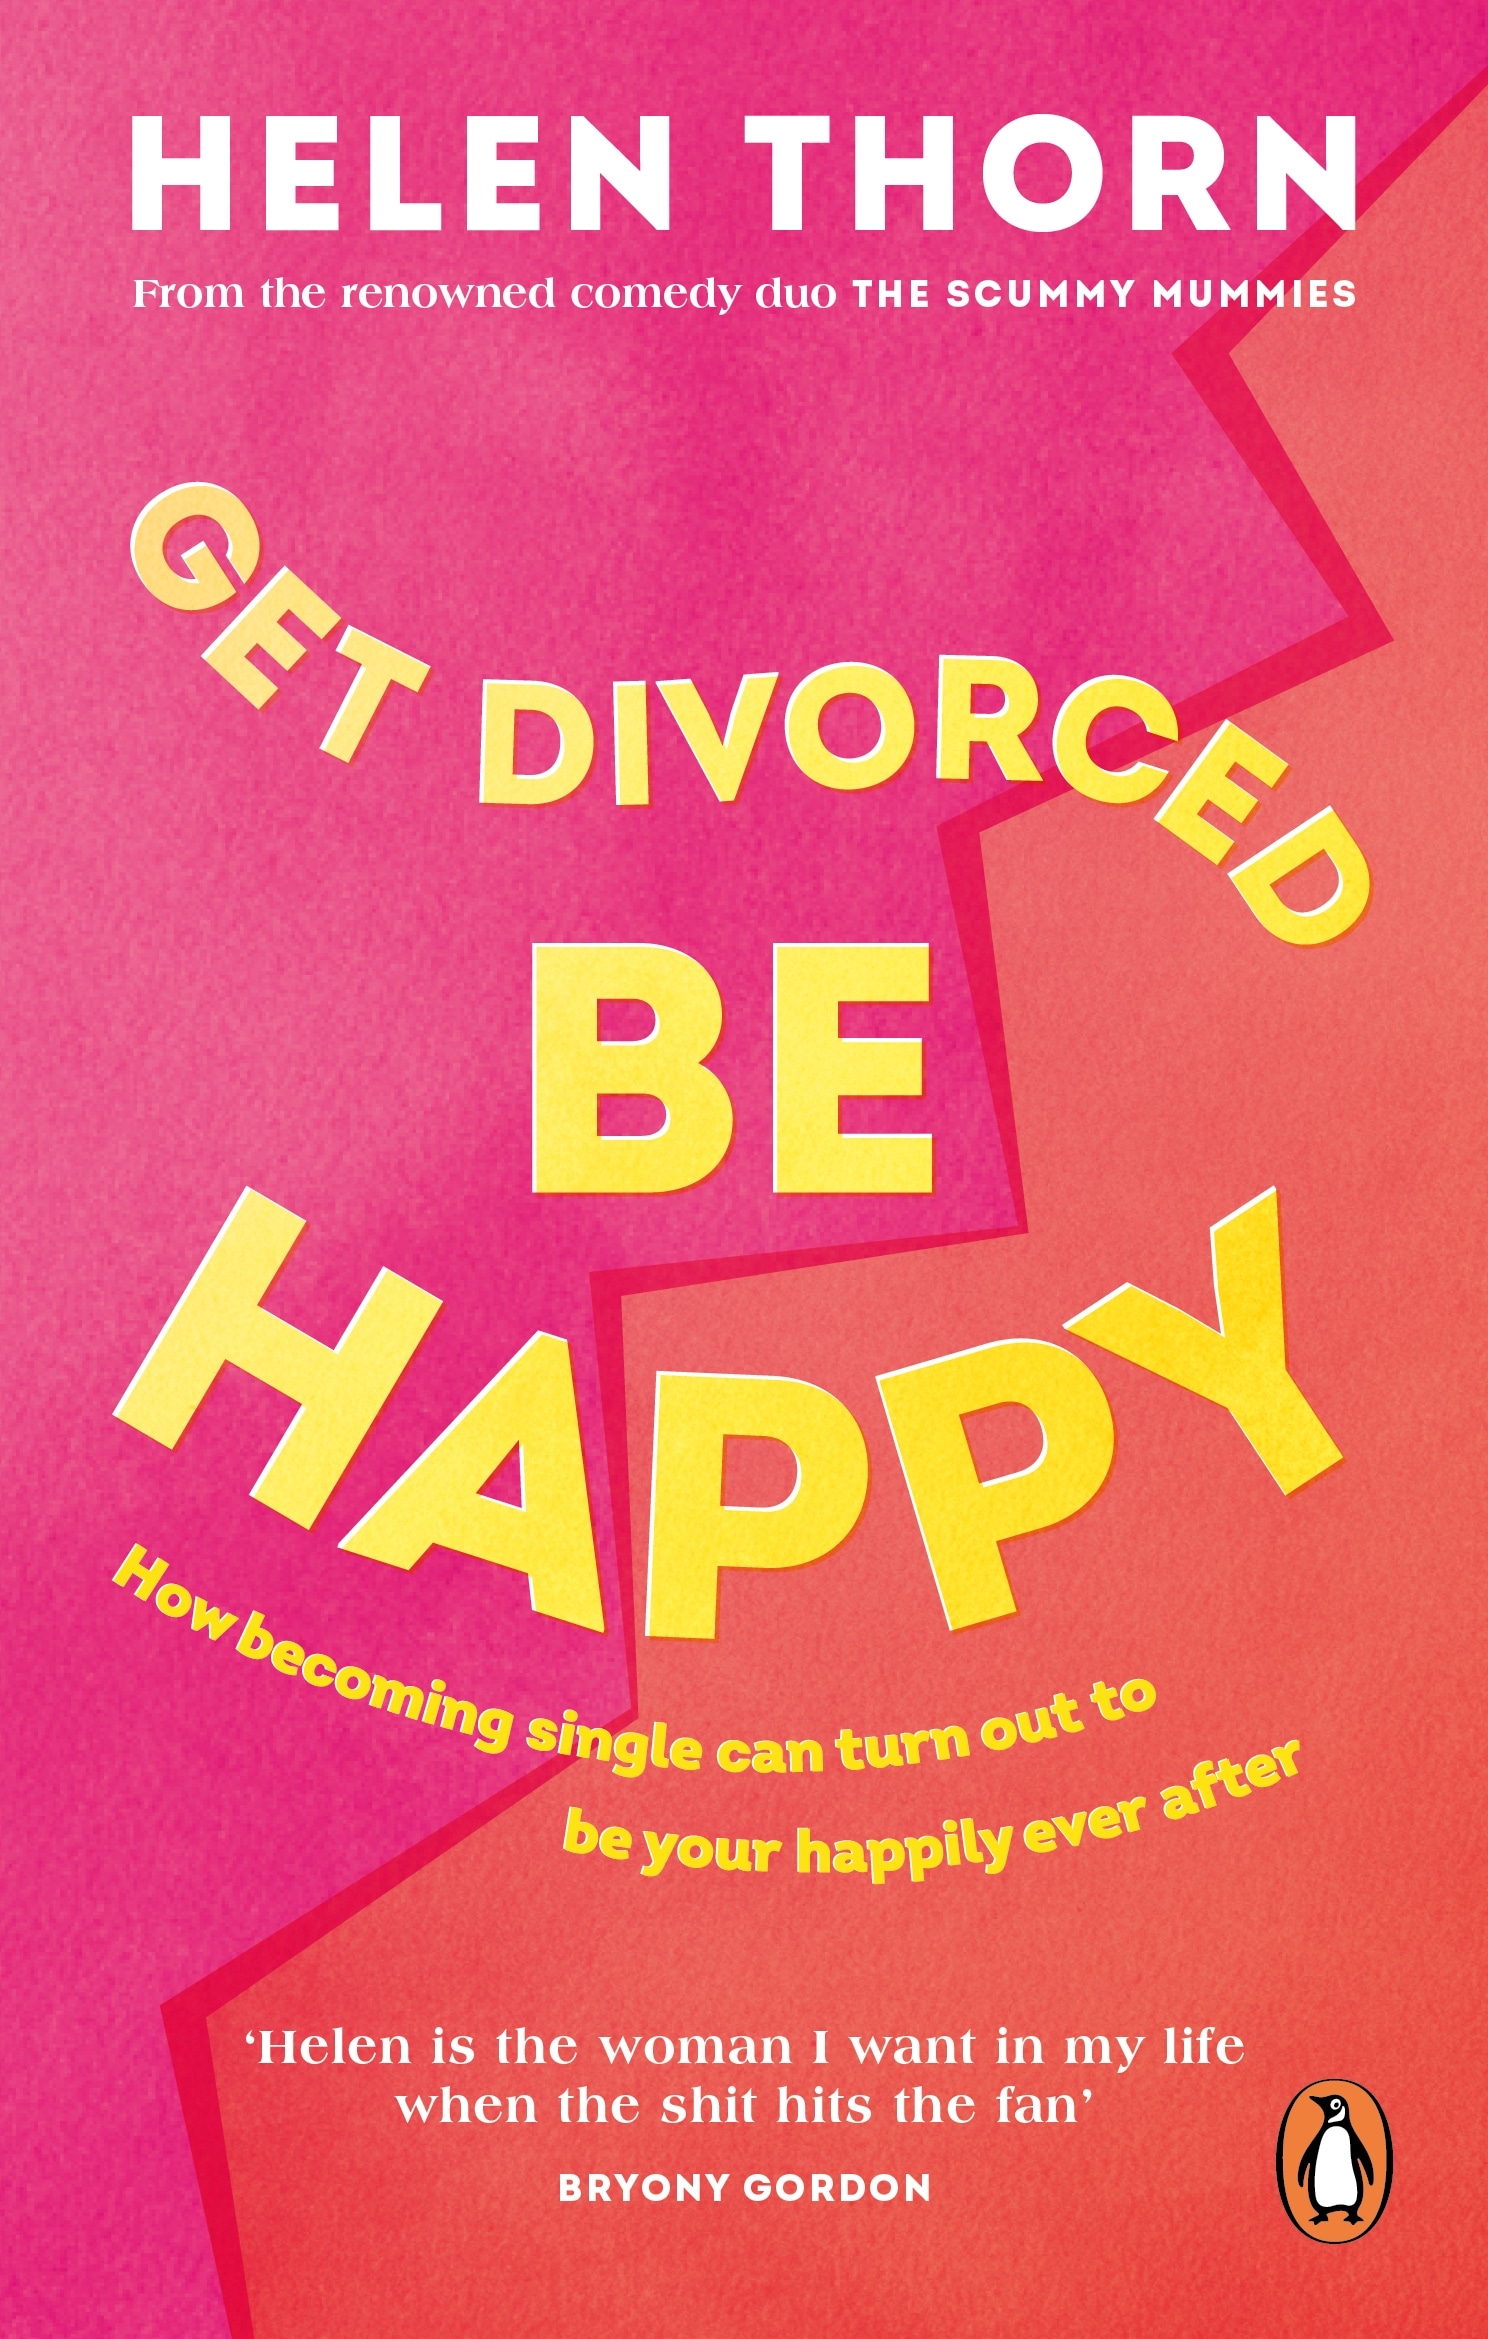 Book “Get Divorced, Be Happy” by Helen Thorn — July 28, 2022